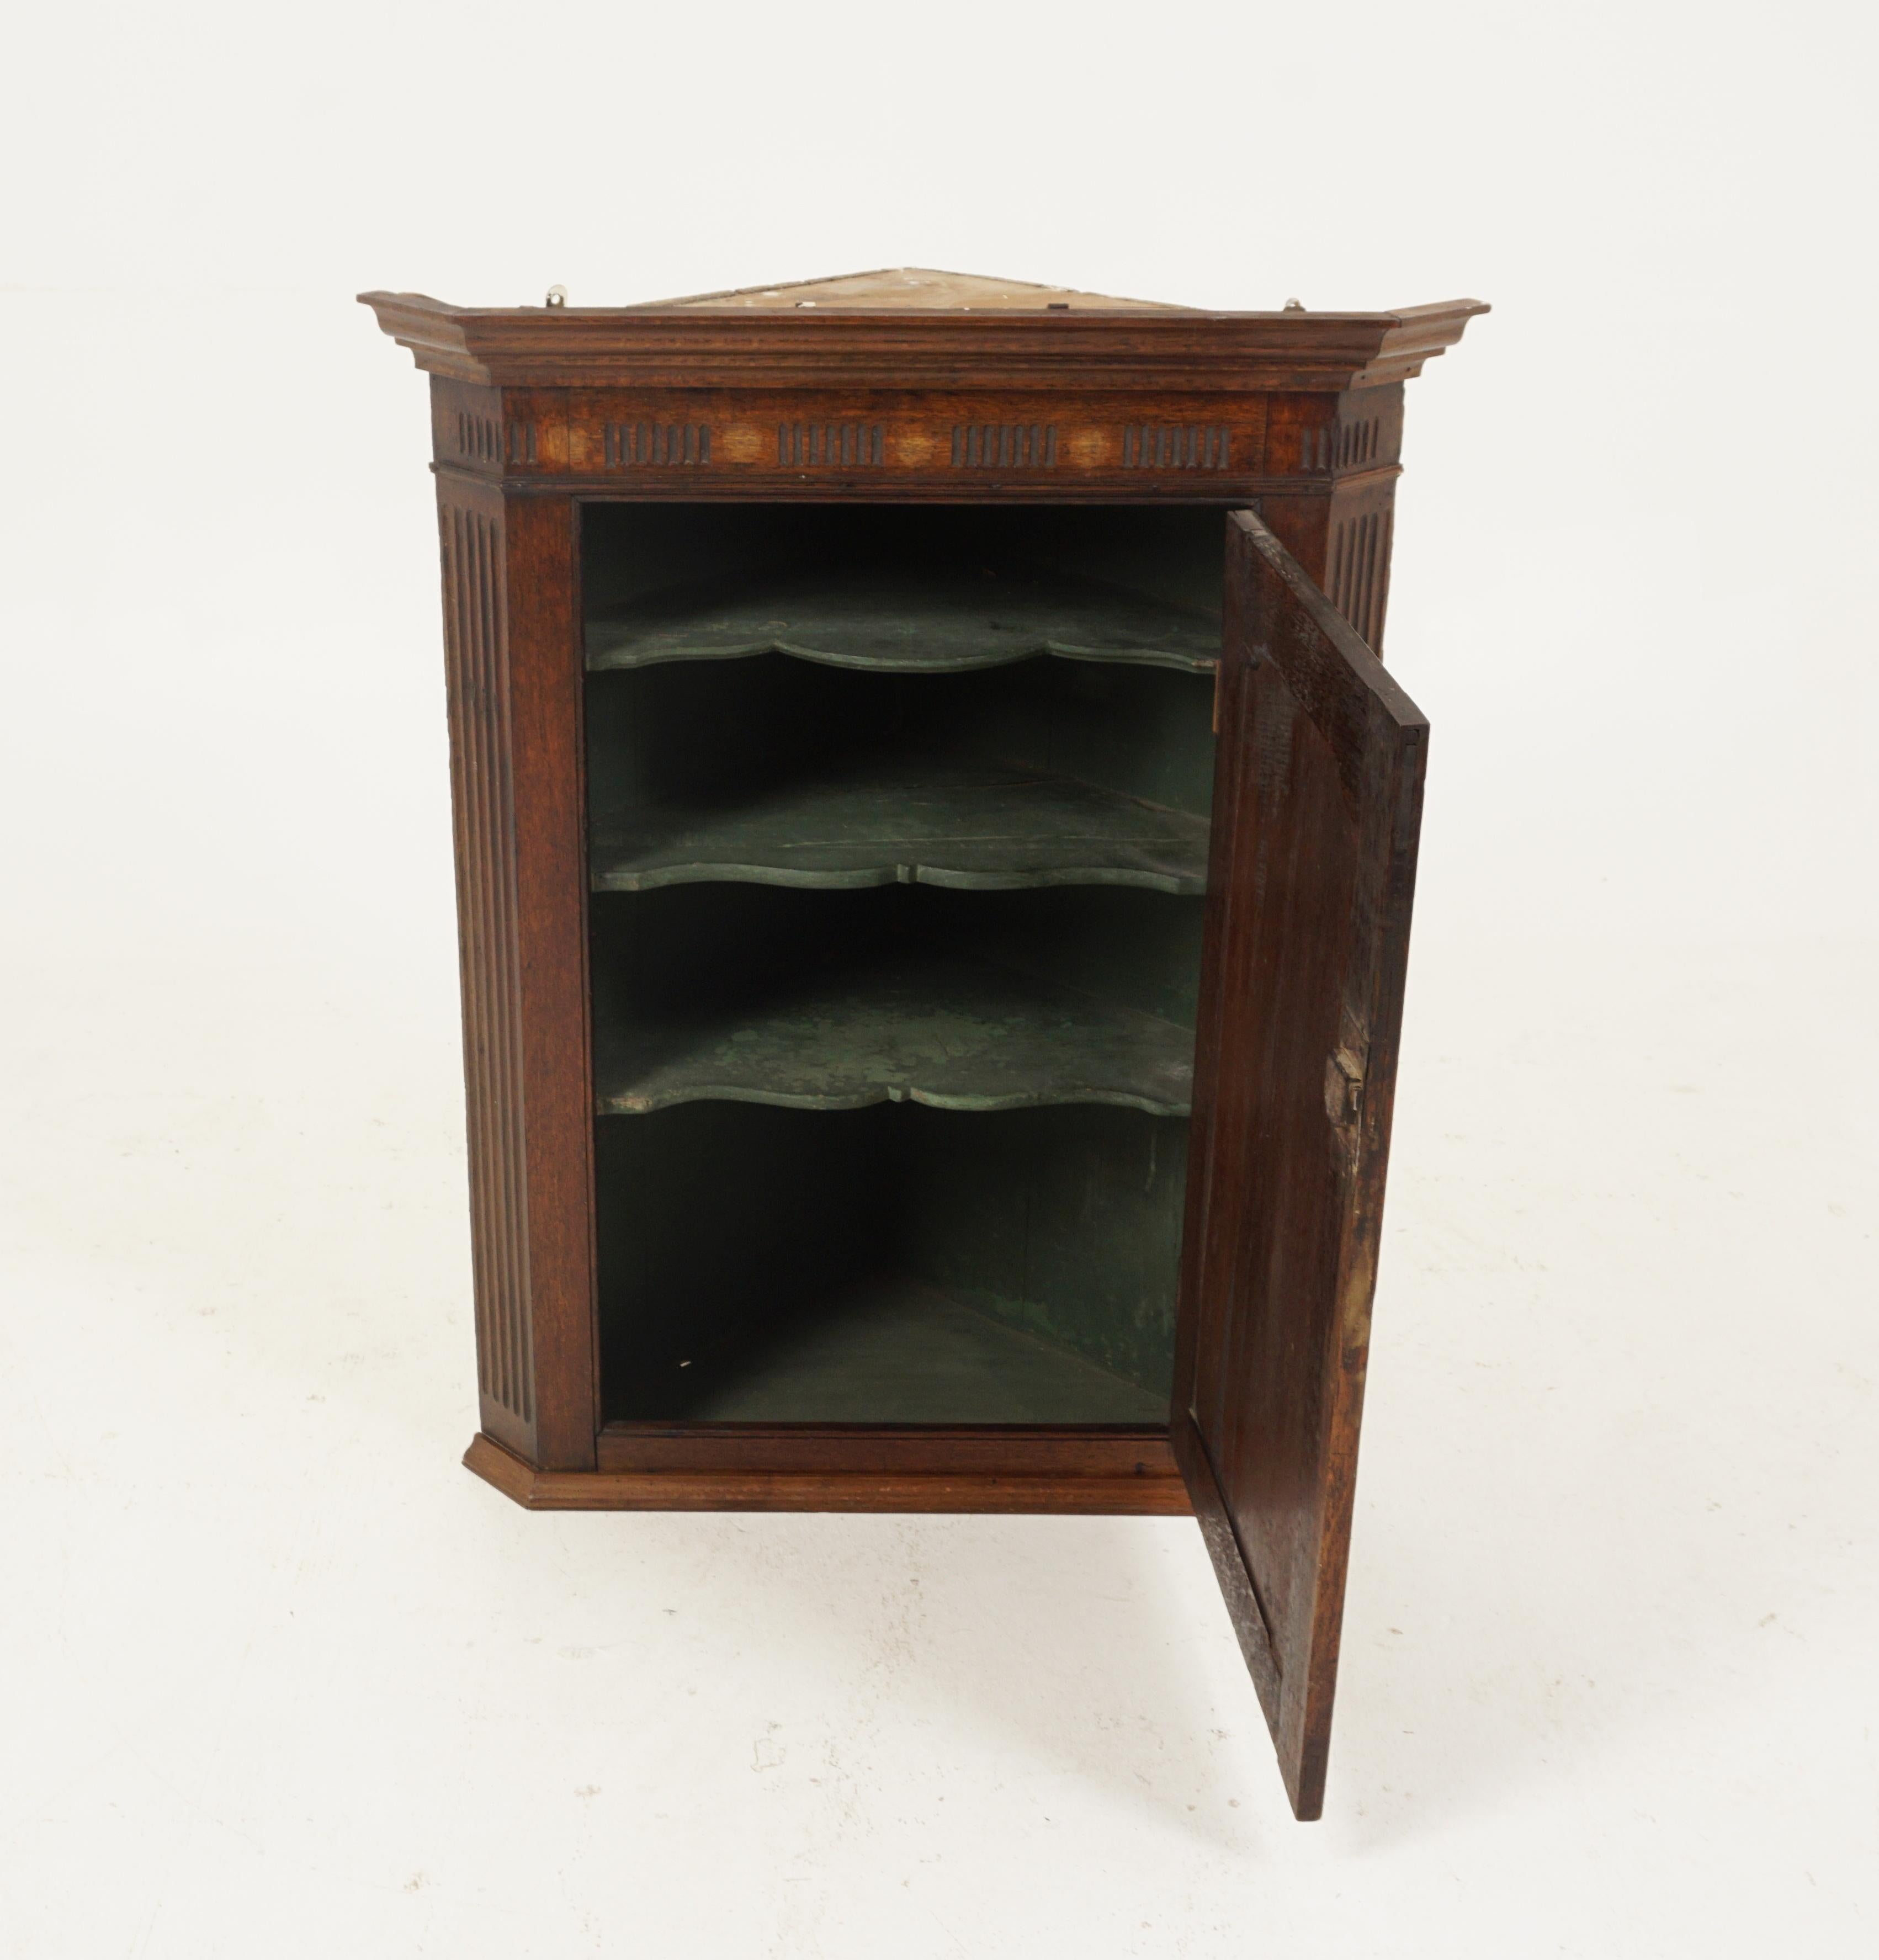 Antique hanging corner cabinet, Georgian, Inlaid, Oak, Scotland 1830, H263

Scotland 1830
Solid oak
Original finish
Shaped pediment with inlay to the top
It has a panelled door with a fancy escutcheon
Opens to reveal an interior with three shaped